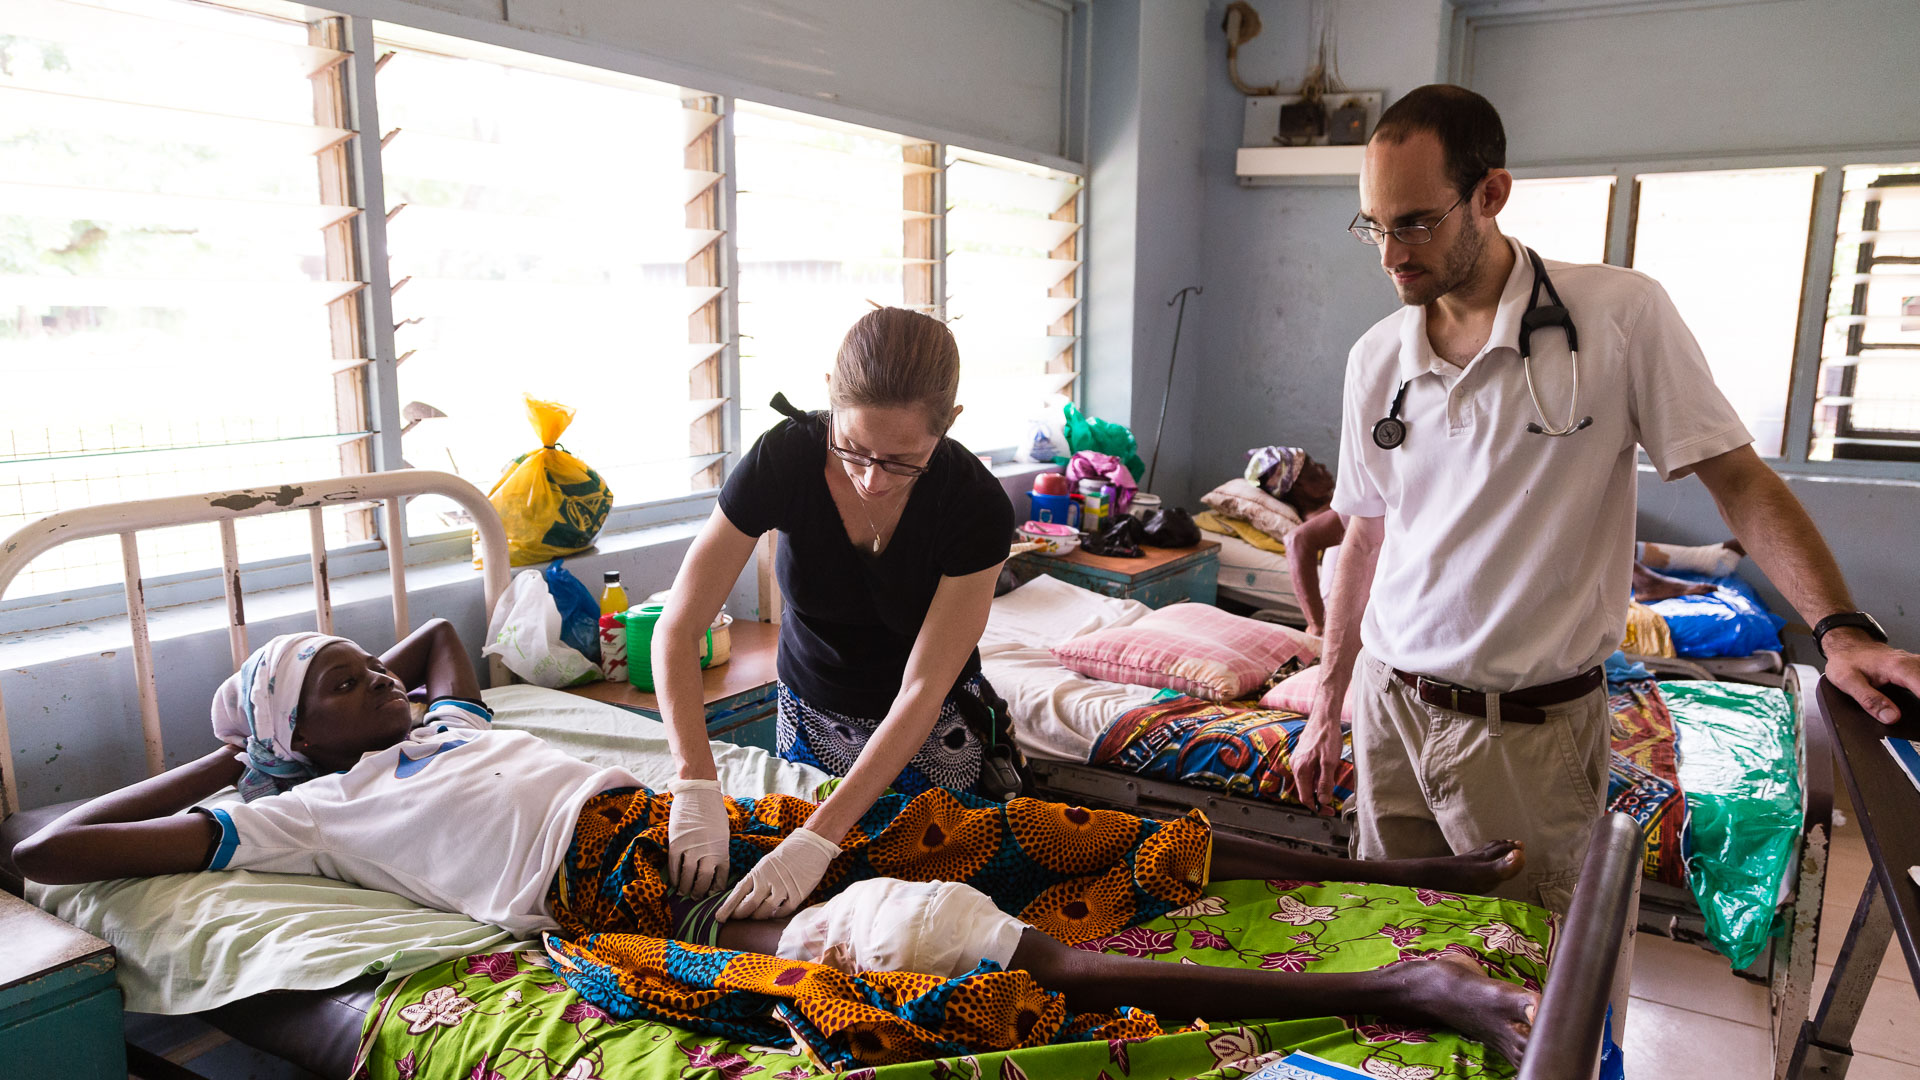 An IMB surgeon ministers to patients in West Africa.